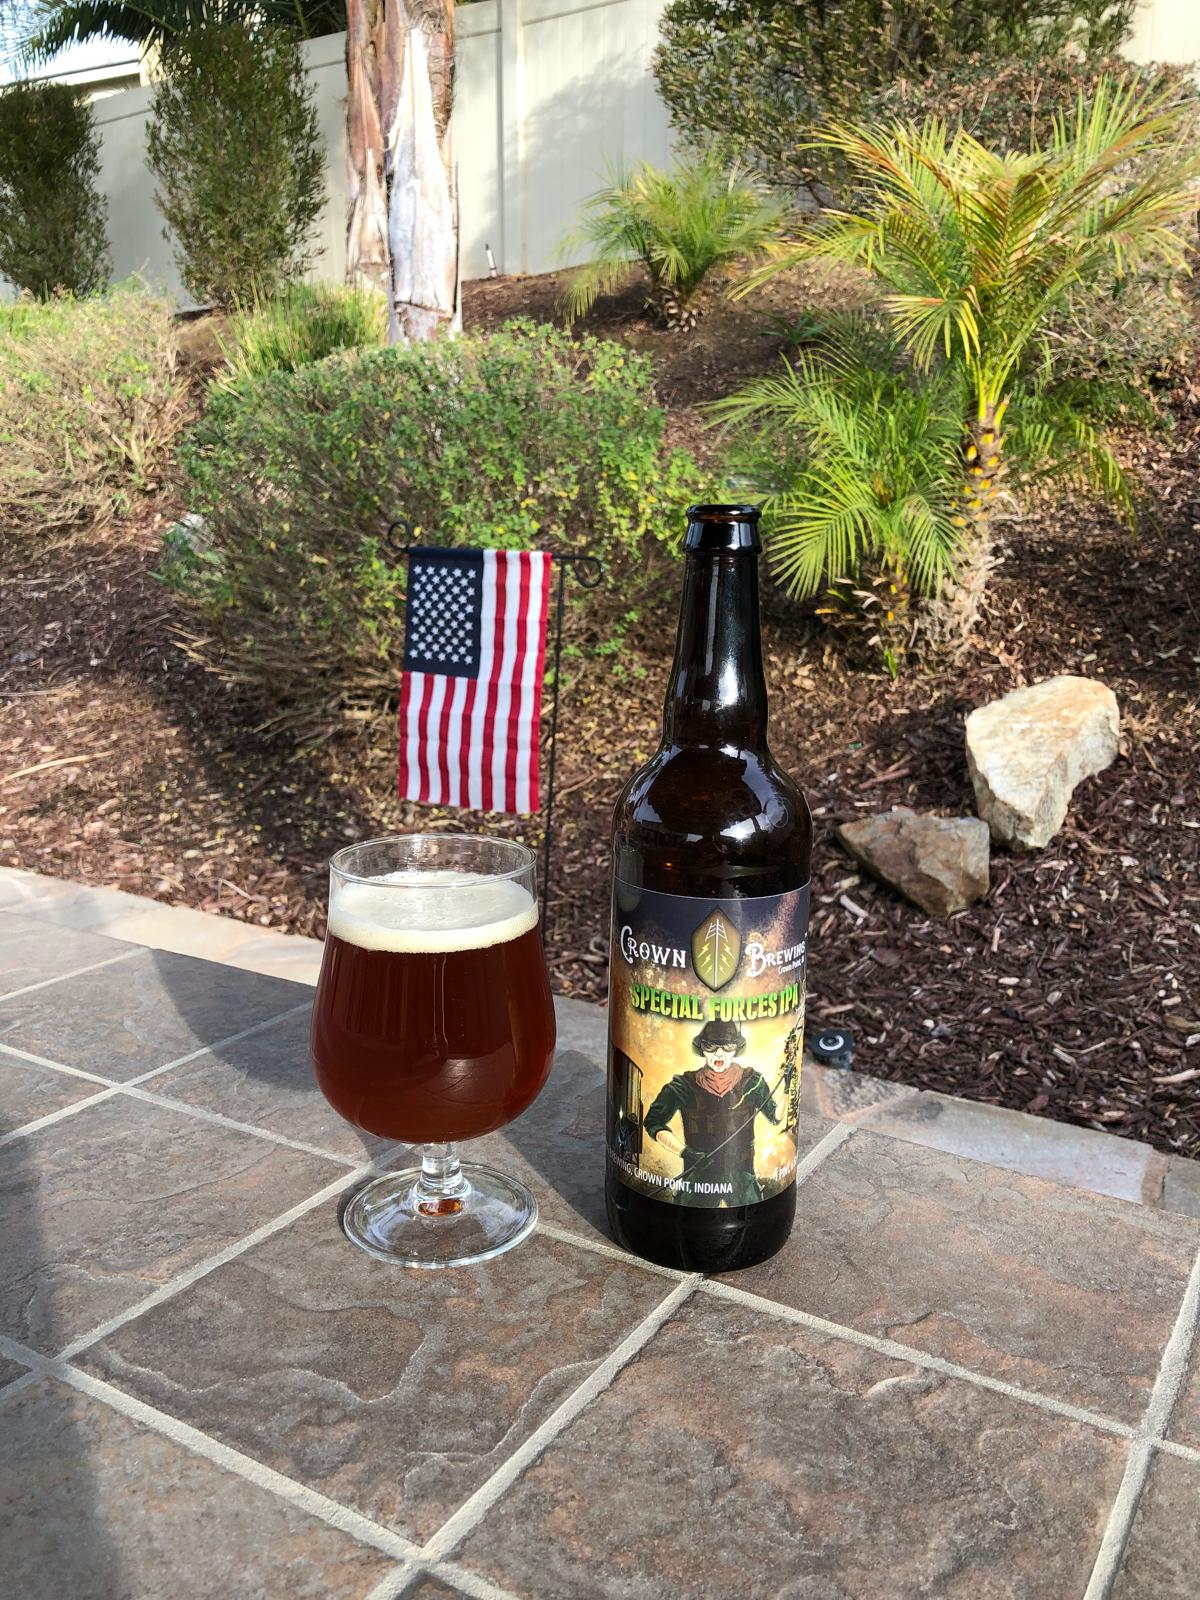 Special Forces IPA